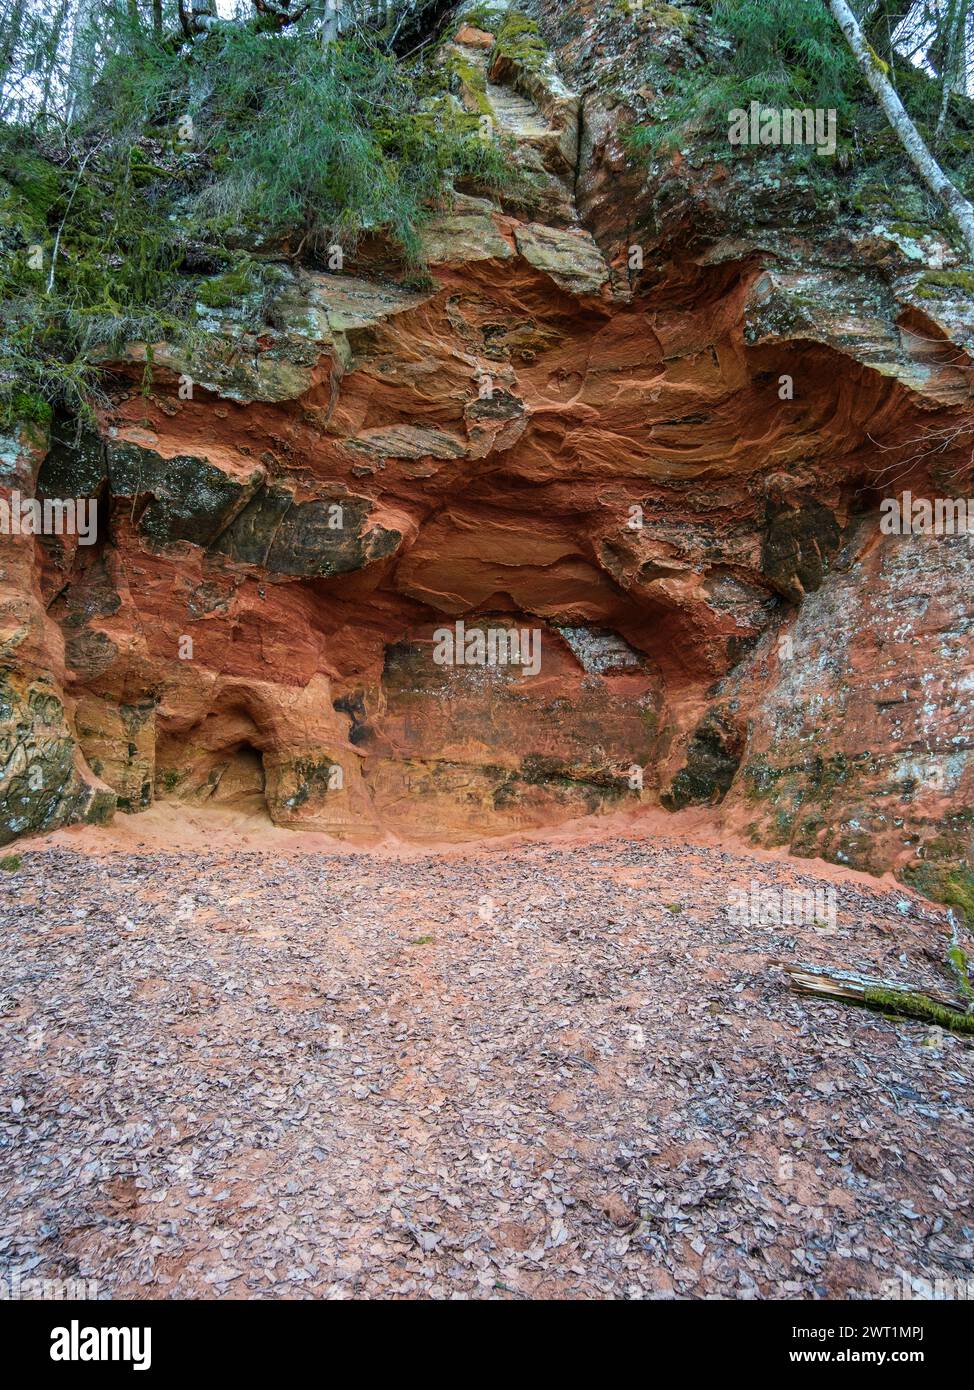 The red cliffs of Cesis offer a glimpse into Latvia's ancient past, their weathered faces telling the story of millions of years of geological evoluti Stock Photo